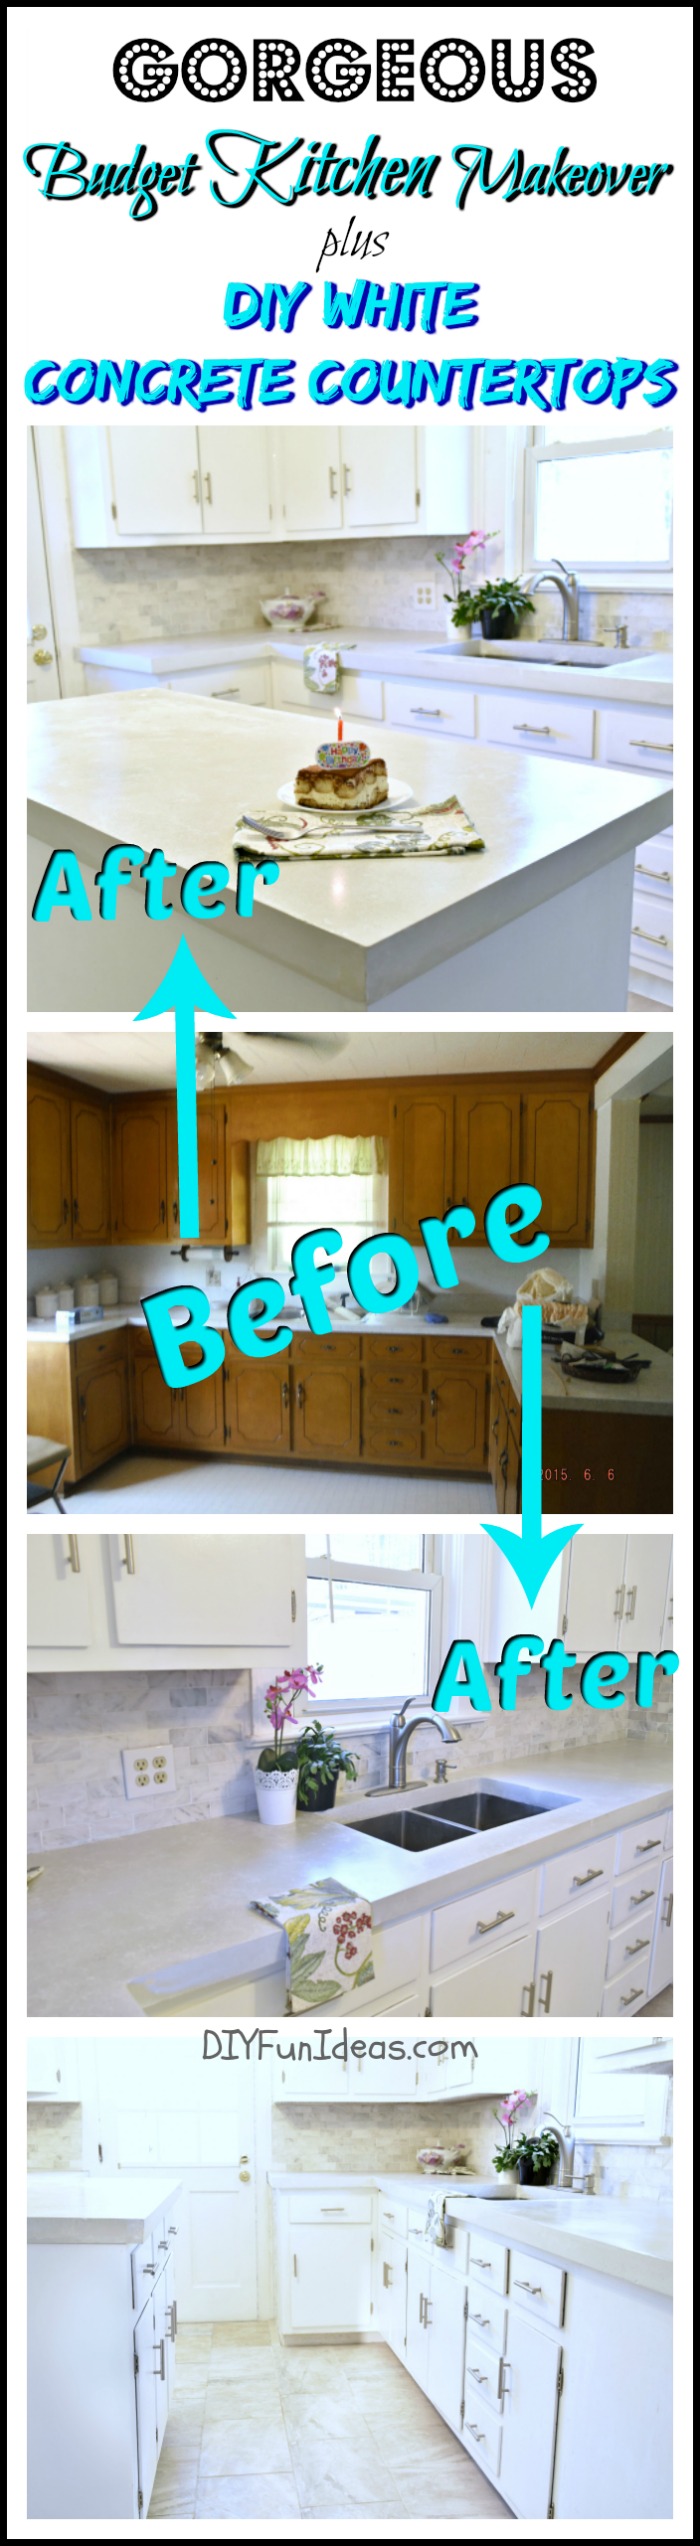 A MUST SEE DROP DEAD GORGEOUS DIY KITCHEN MAKEOVER with DIY WHITE CONCRETE COUNTERTOPS